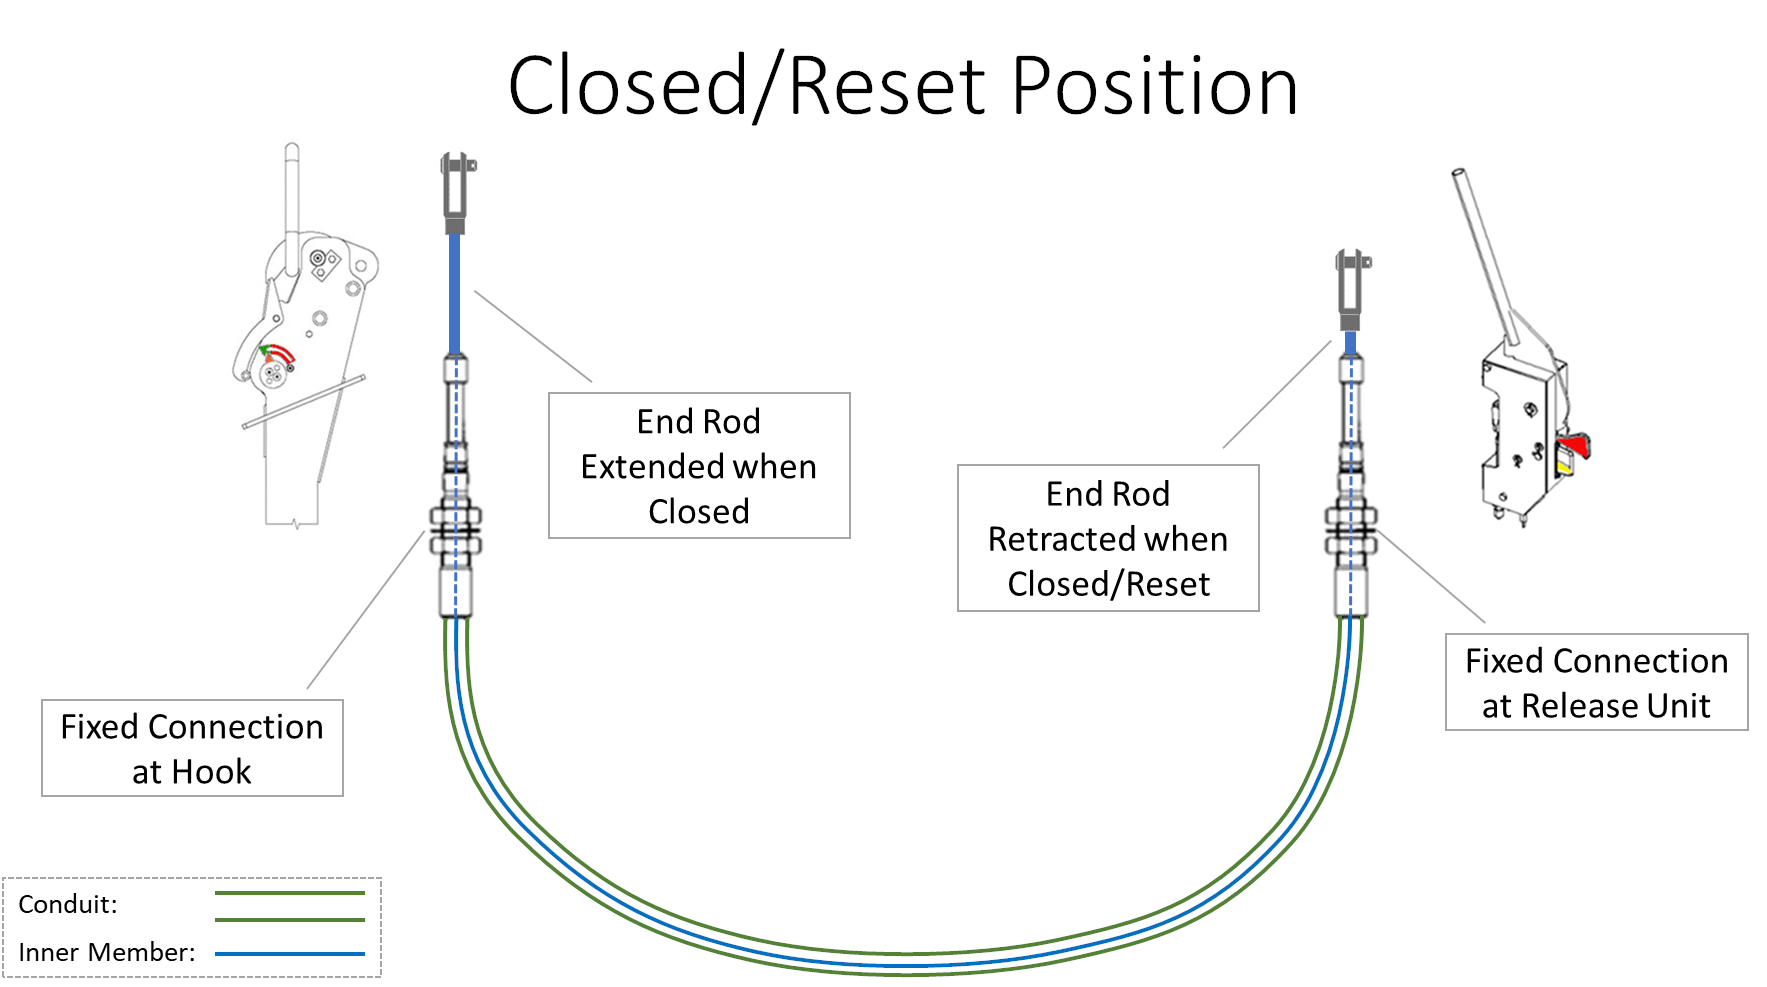 Graphic depicting hook and control cable positions in the closed/reset condition; Click to enlarge